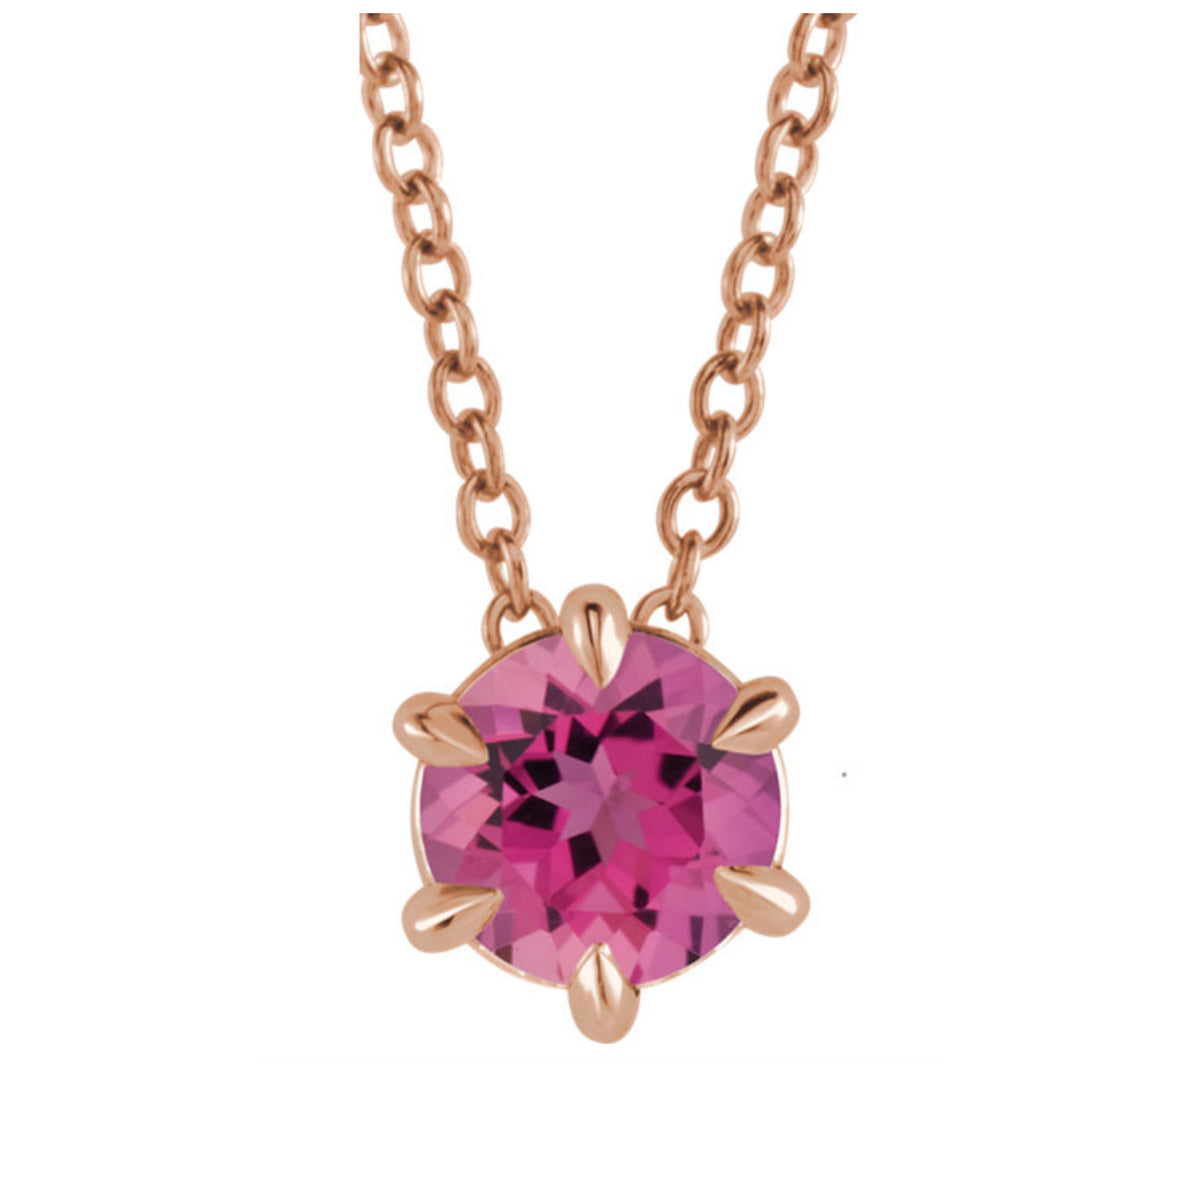 Genuine Gemstone Necklace in White, Yellow or Rose Gold - Talisman Collection Fine Jewelers